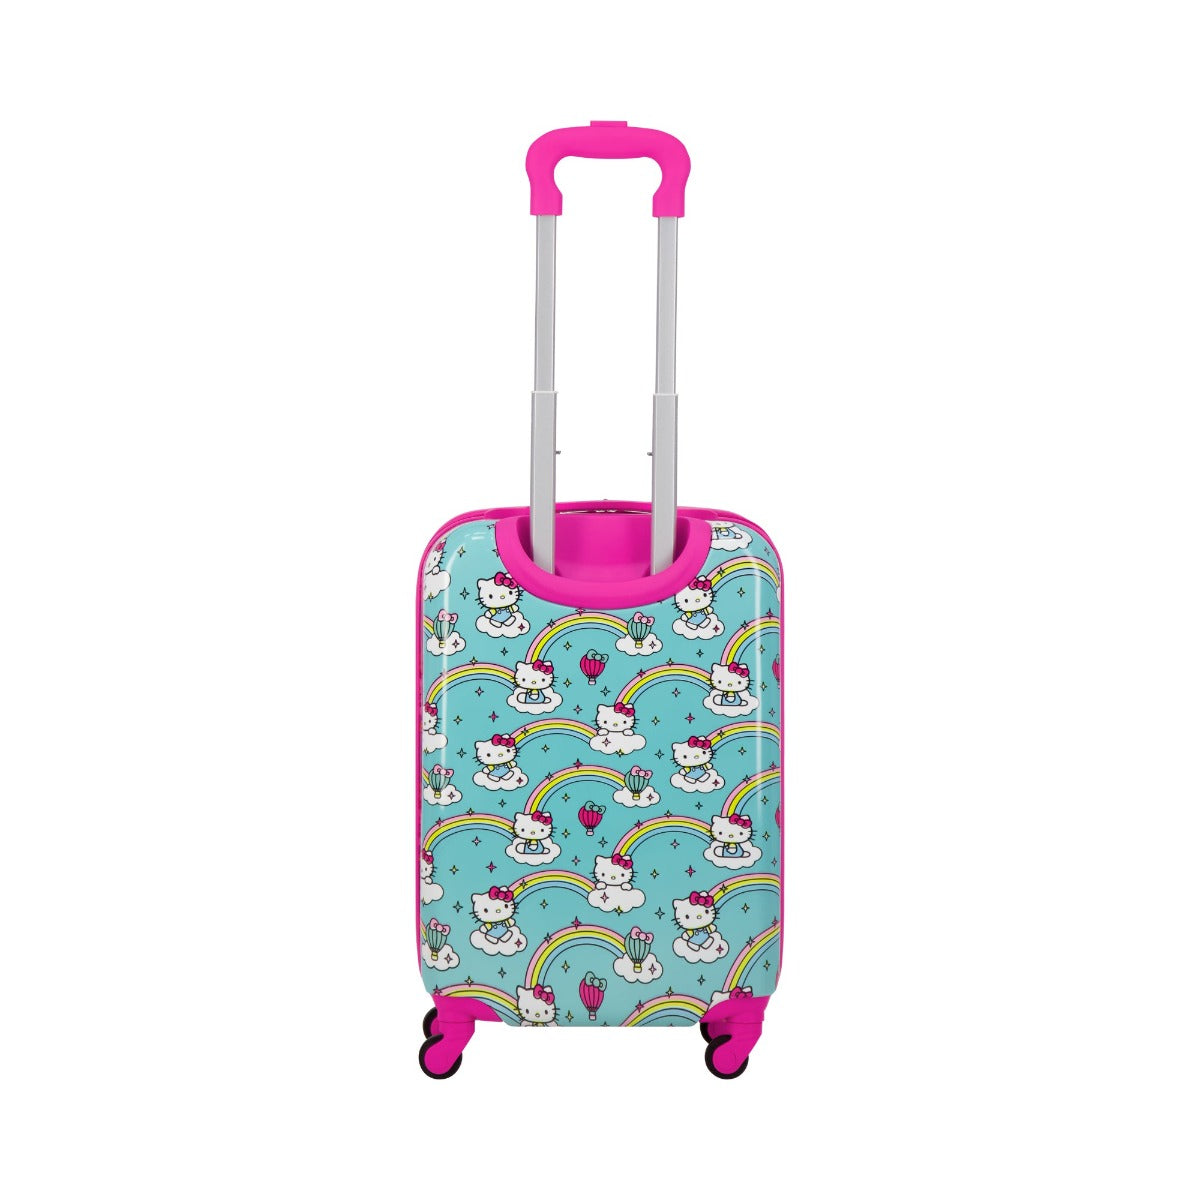 Hello Kitty Ful Rainbows 21 inch carry-on spinner suitcase luggage for kids